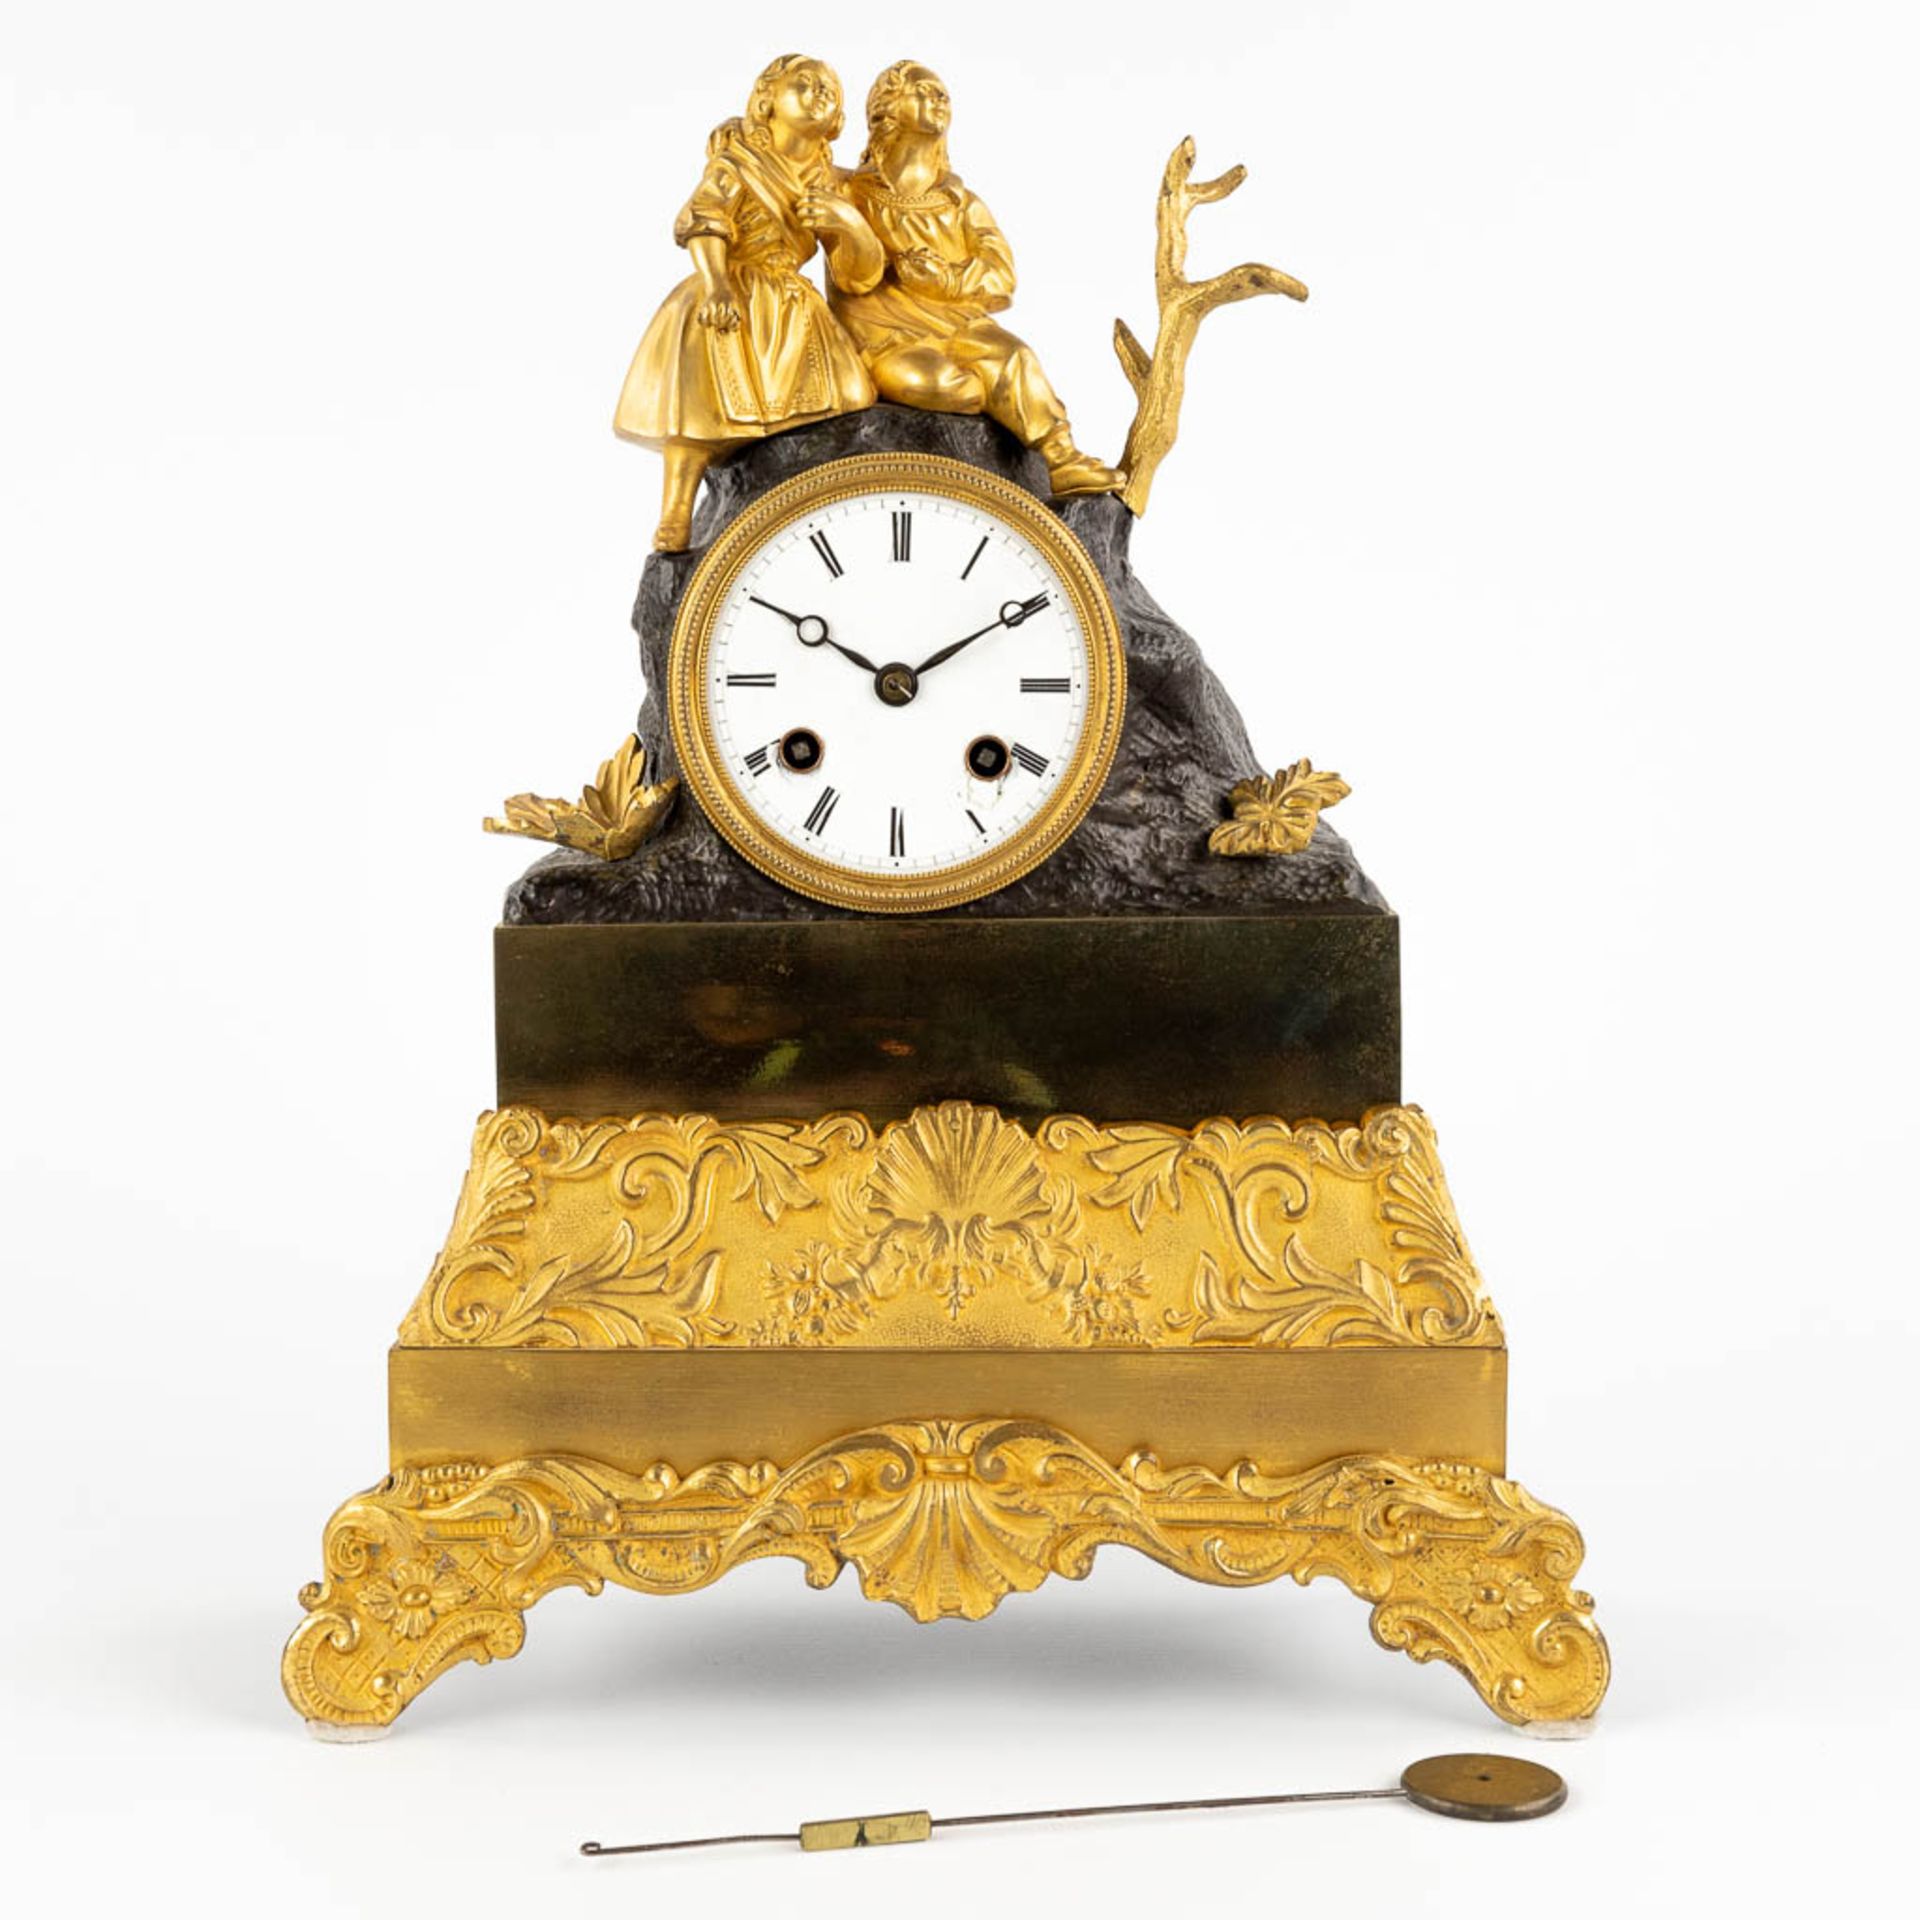 A mantle clock, gilt and patinated bronze decorated with two children, circa 1900. (D:11 x W:26 x H: